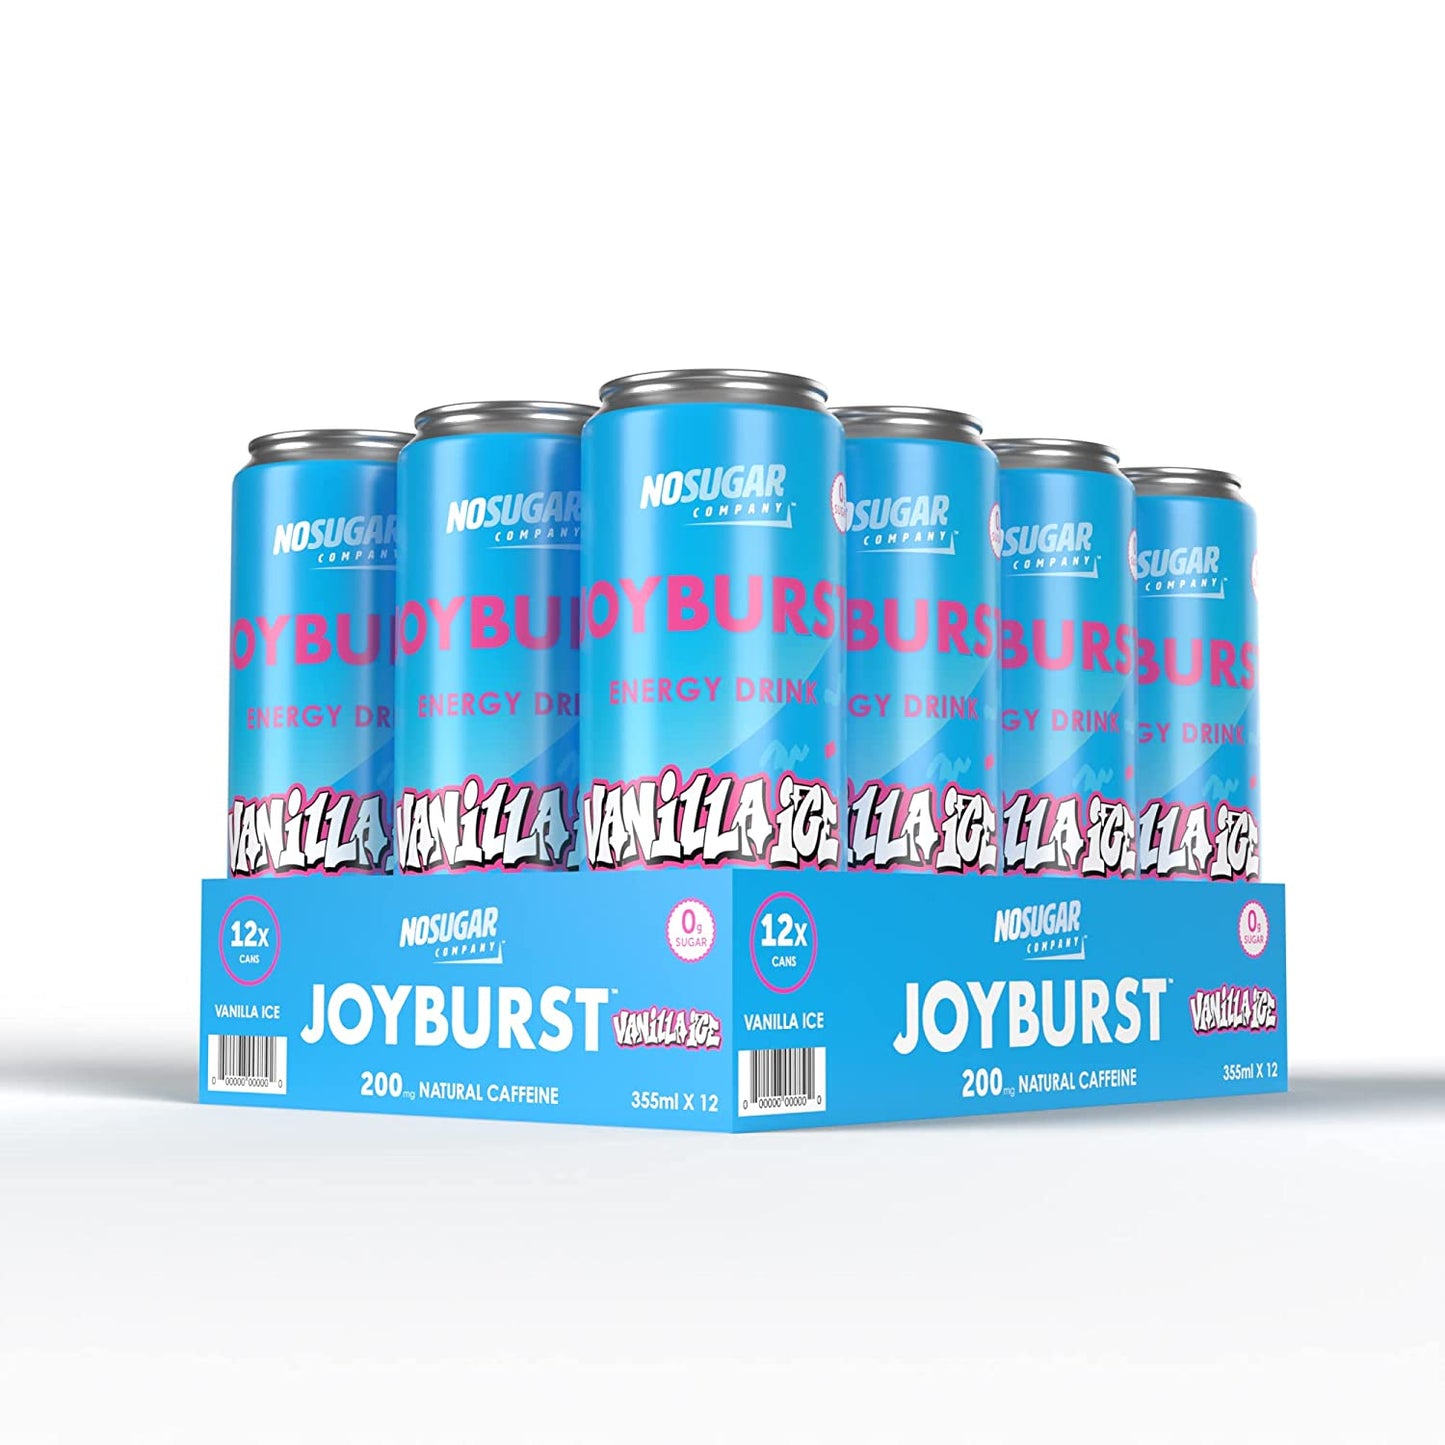 NEW: Vanilla Ice Energy Drink, Tastes like Cotton Candy with a hint of Blueberries, Joyburst, Sugar Free, Naturally Caffeinated, Sparkling energy drink, Zero Calorie- 12 Fl Oz (12 pack)